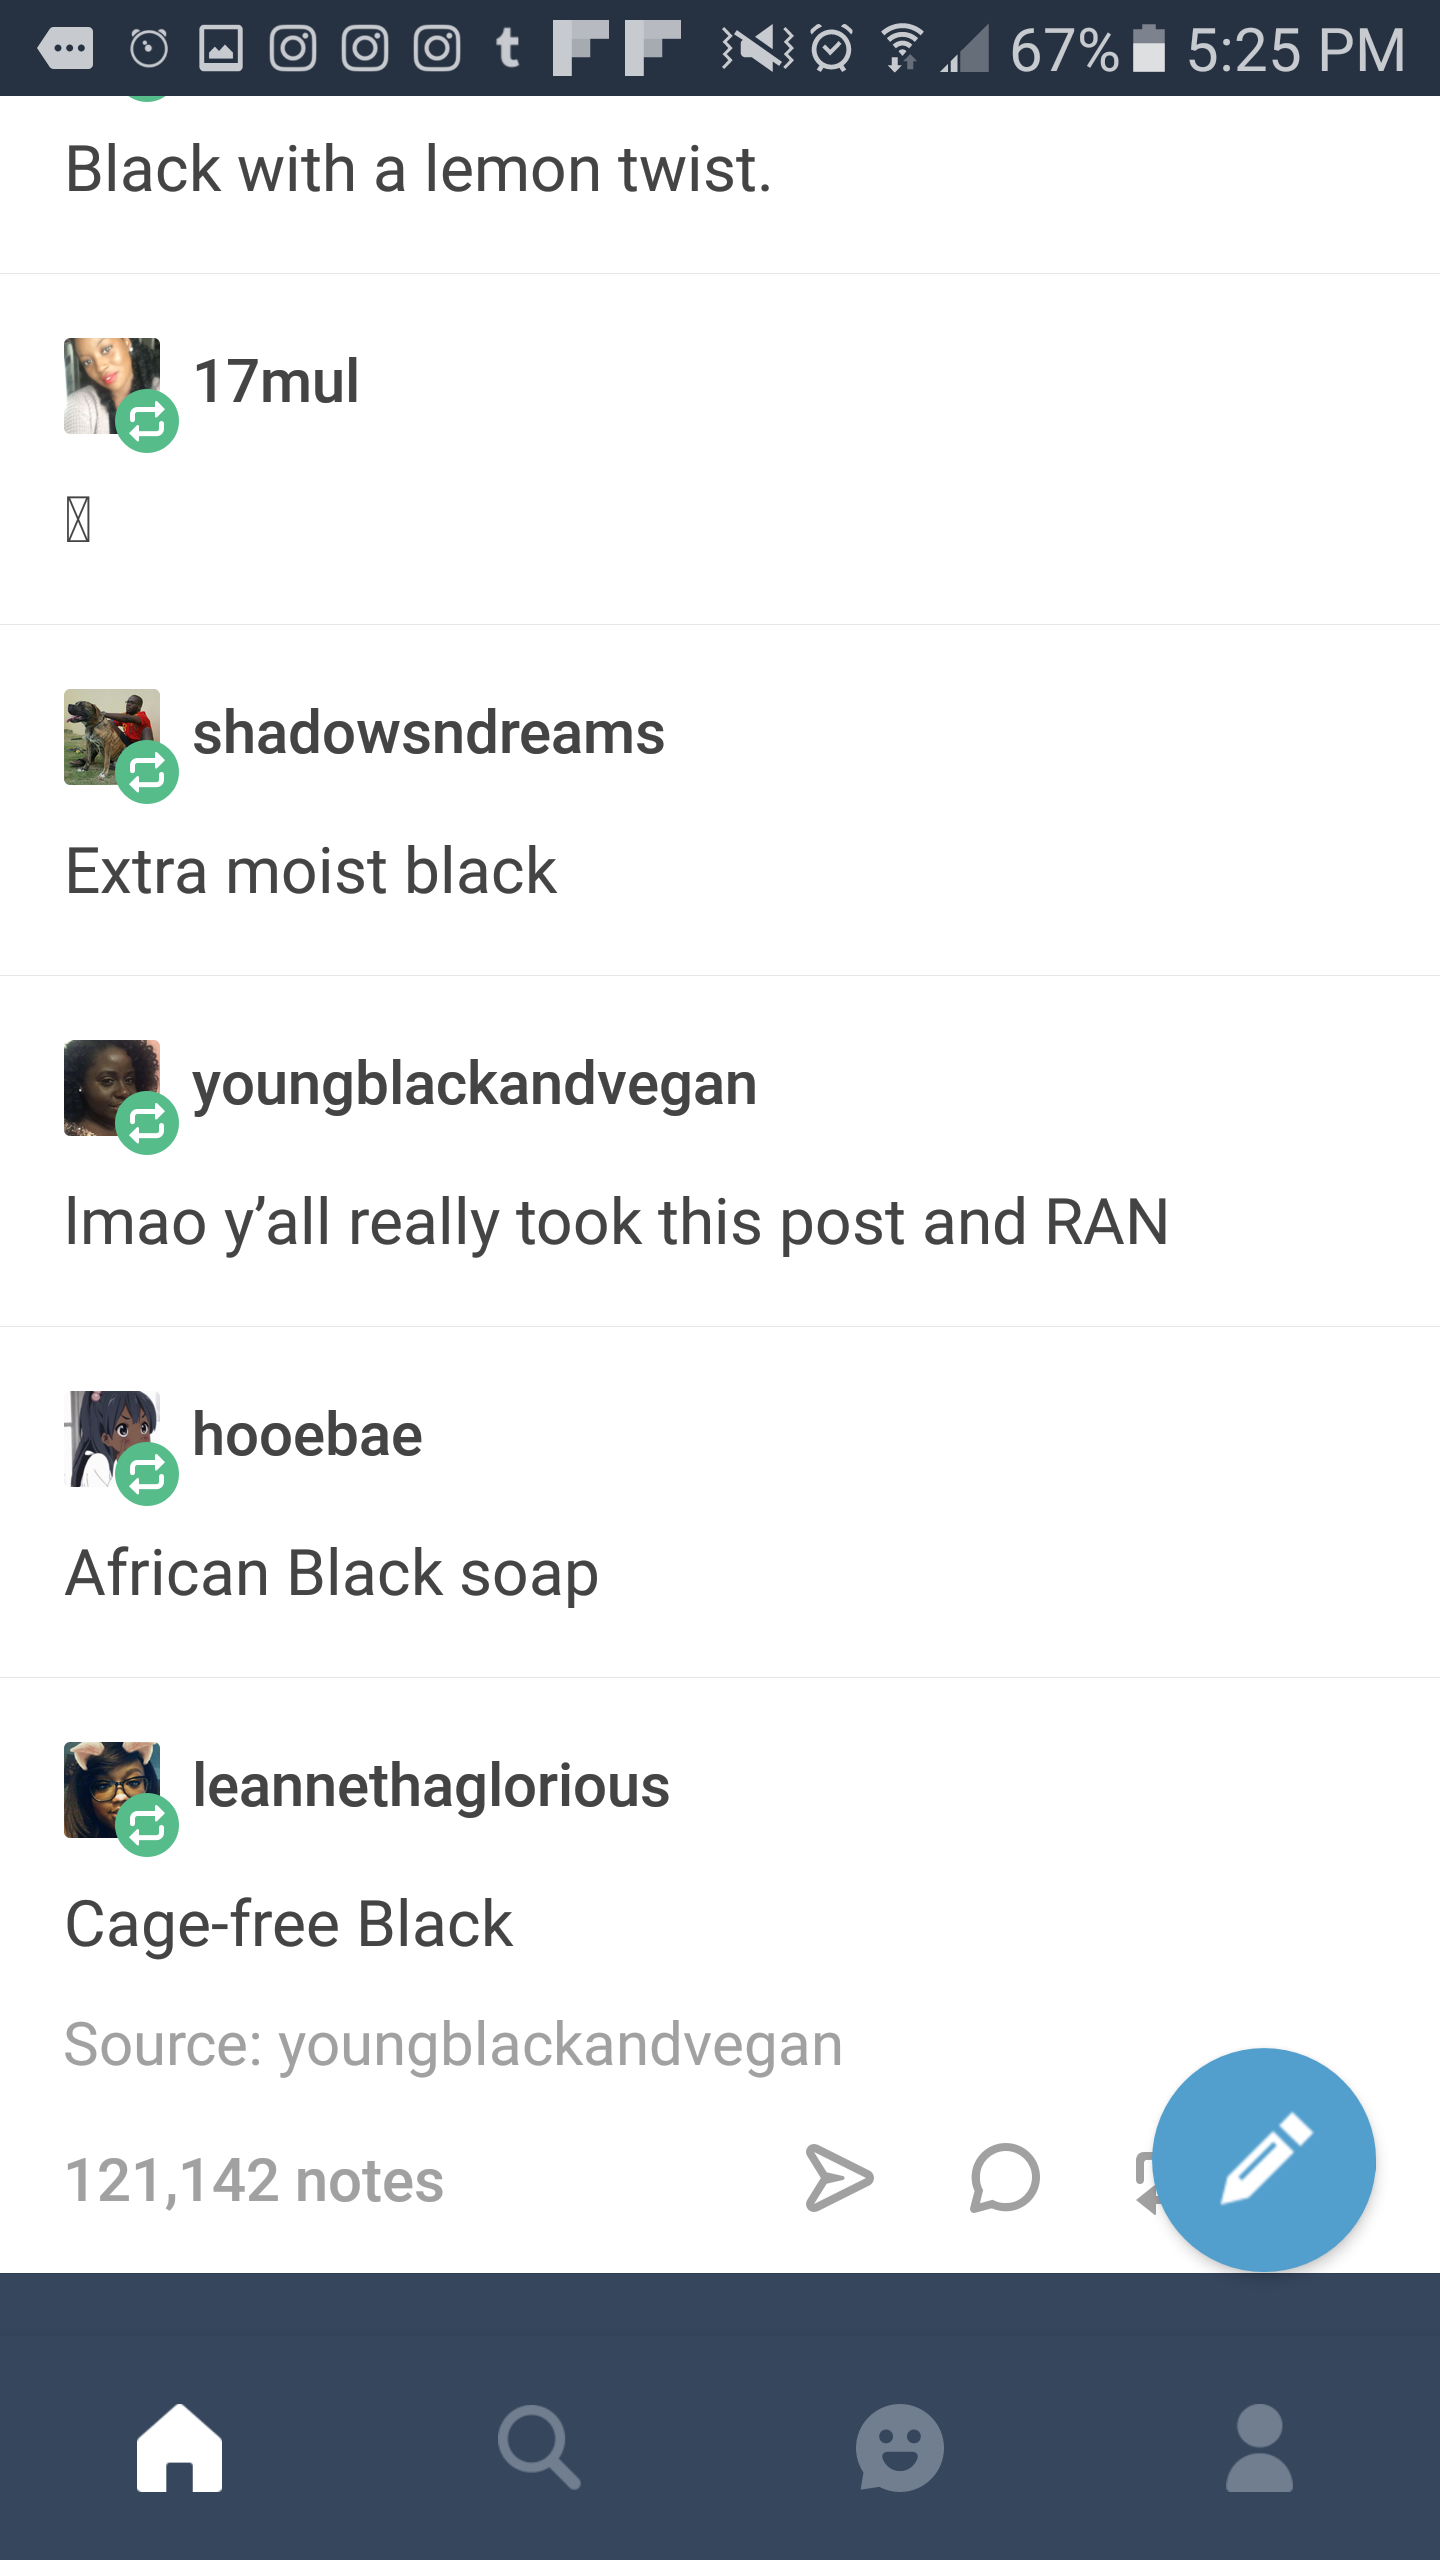 tumblr - payment options ux - O O O O O O Tff N,67% Black with a lemon twist. 17mul T shadowsndreams Extra moist black youngblackandvegan Imao y'all really took this post and Ran na hooebae African Black soap leannethaglorious Cagefree Black Source youngb